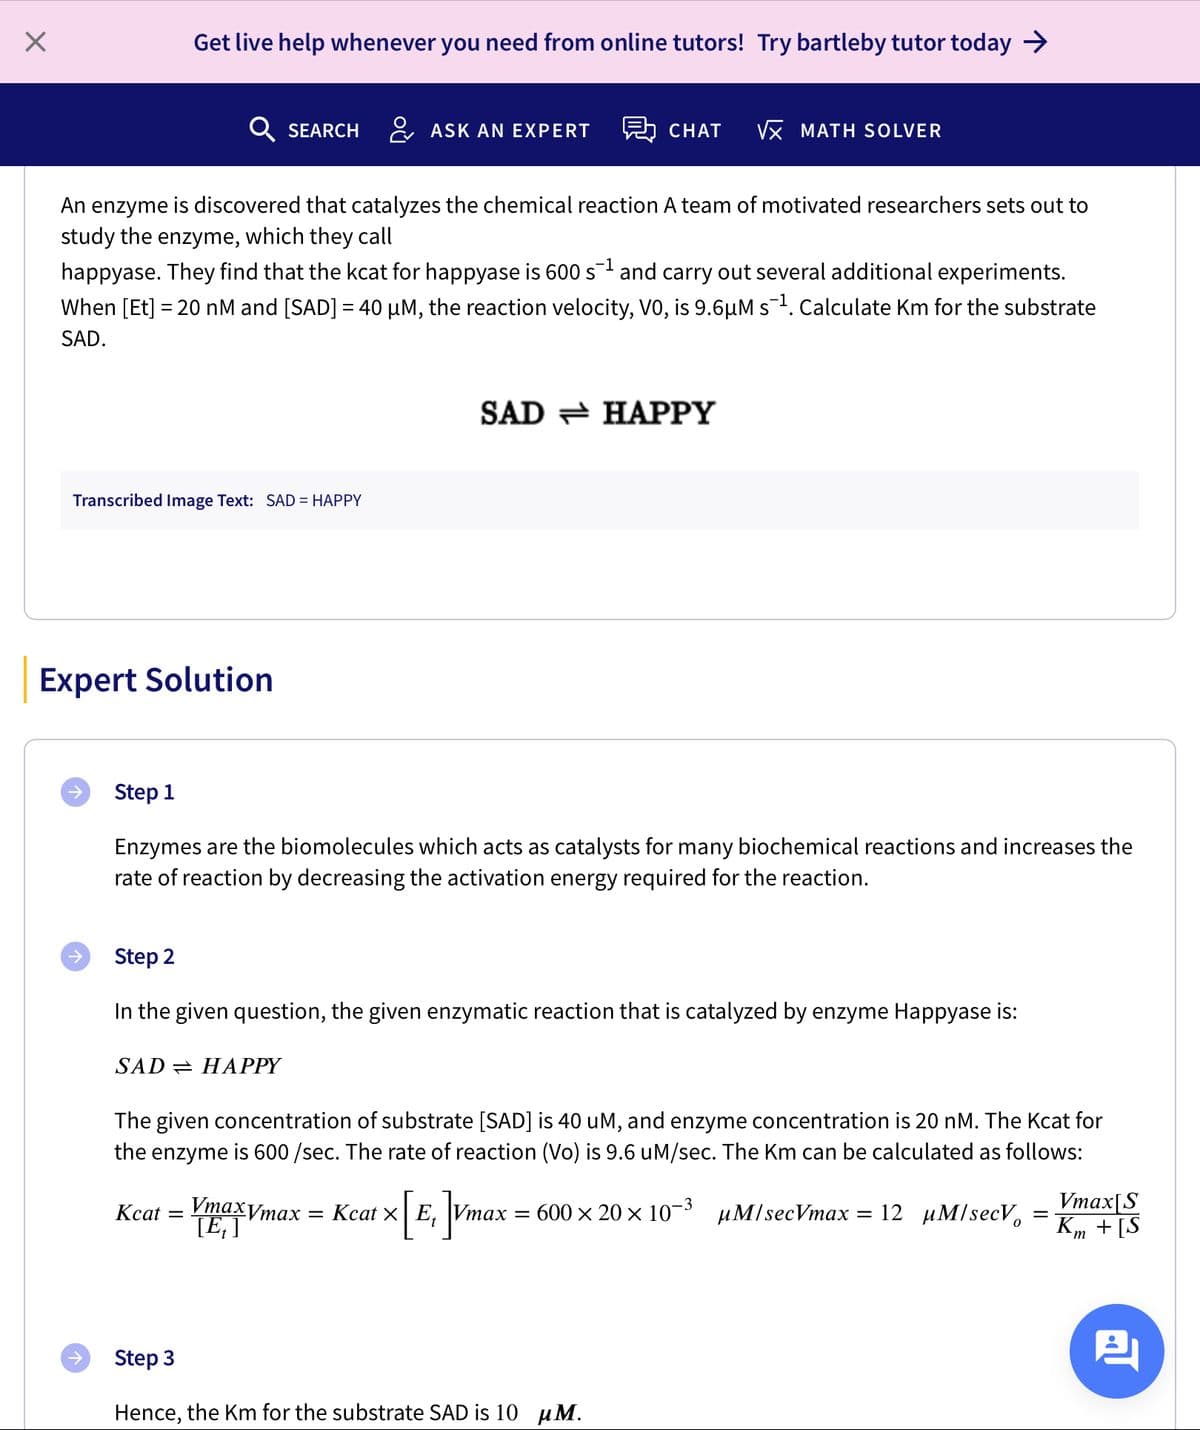 Get live help whenever you need from online tutors! Try bartleby tutor today >
Q SEARCH
& ASK AN EXPERT
A CHAT
Vx MATH SOLVER
An
enzyme
is discovered that catalyzes the chemical reaction A team of motivated researchers sets out to
study the enzyme, which they call
happyase. They find that the kcat for happyase is 600 s and carry out several additional experiments.
When [Et] = 20 nM and [SAD] = 40 µM, the reaction velocity, V0, is 9.6µM s. Calculate Km for the substrate
-
SAD.
SAD = HAPPY
Transcribed Image Text: SAD = HAPPY
Expert Solution
Step 1
Enzymes are the biomolecules which acts as catalysts for many biochemical reactions and increases the
rate of reaction by decreasing the activation energy required for the reaction.
Step 2
In the given question, the given enzymatic reaction that is catalyzed by enzyme Happyase is:
SAD = HAPPY
The given concentration of substrate [SAD] is 40 uM, and enzyme concentration is 20 nM. The Kcat for
the enzyme is 600 /sec. The rate of reaction (Vo) is 9.6 uM/sec. The Km can be calculated as follows:
Vтахутах
TE; ]
Vmax[S
Km + [S
Кcat 3D
— Кcat x| E, Vтах — 600 x 20 х 10-3 риM/secVmax
12 иМ/secVo
Step 3
Hence, the Km for the substrate SAD is 10 µM.
